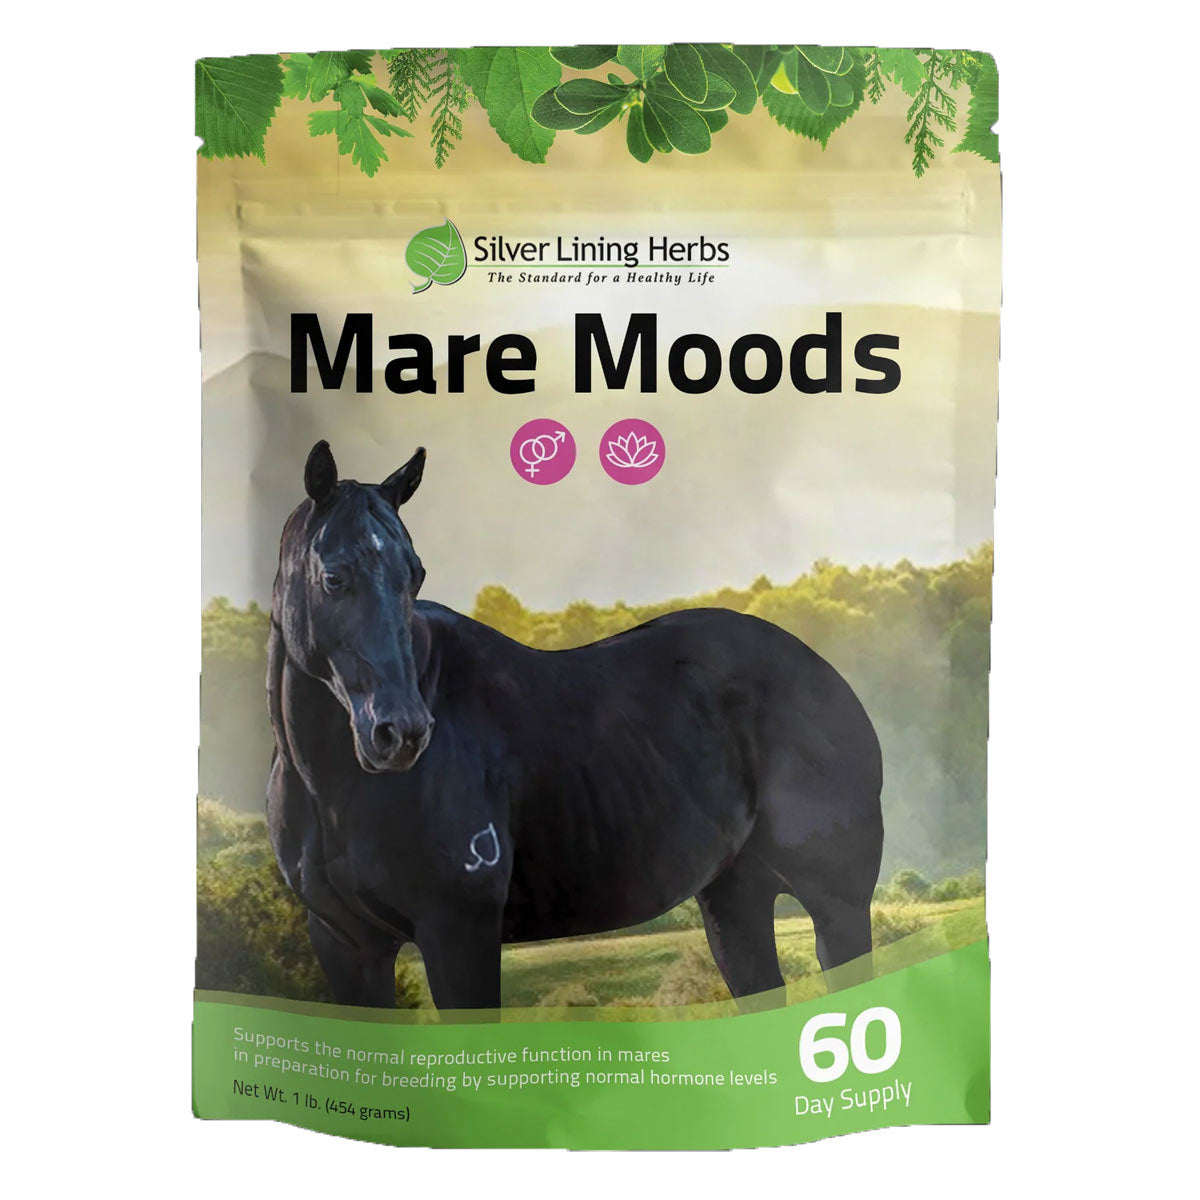 Silver Lining Herbs Mare Moods - 1 lb Bag